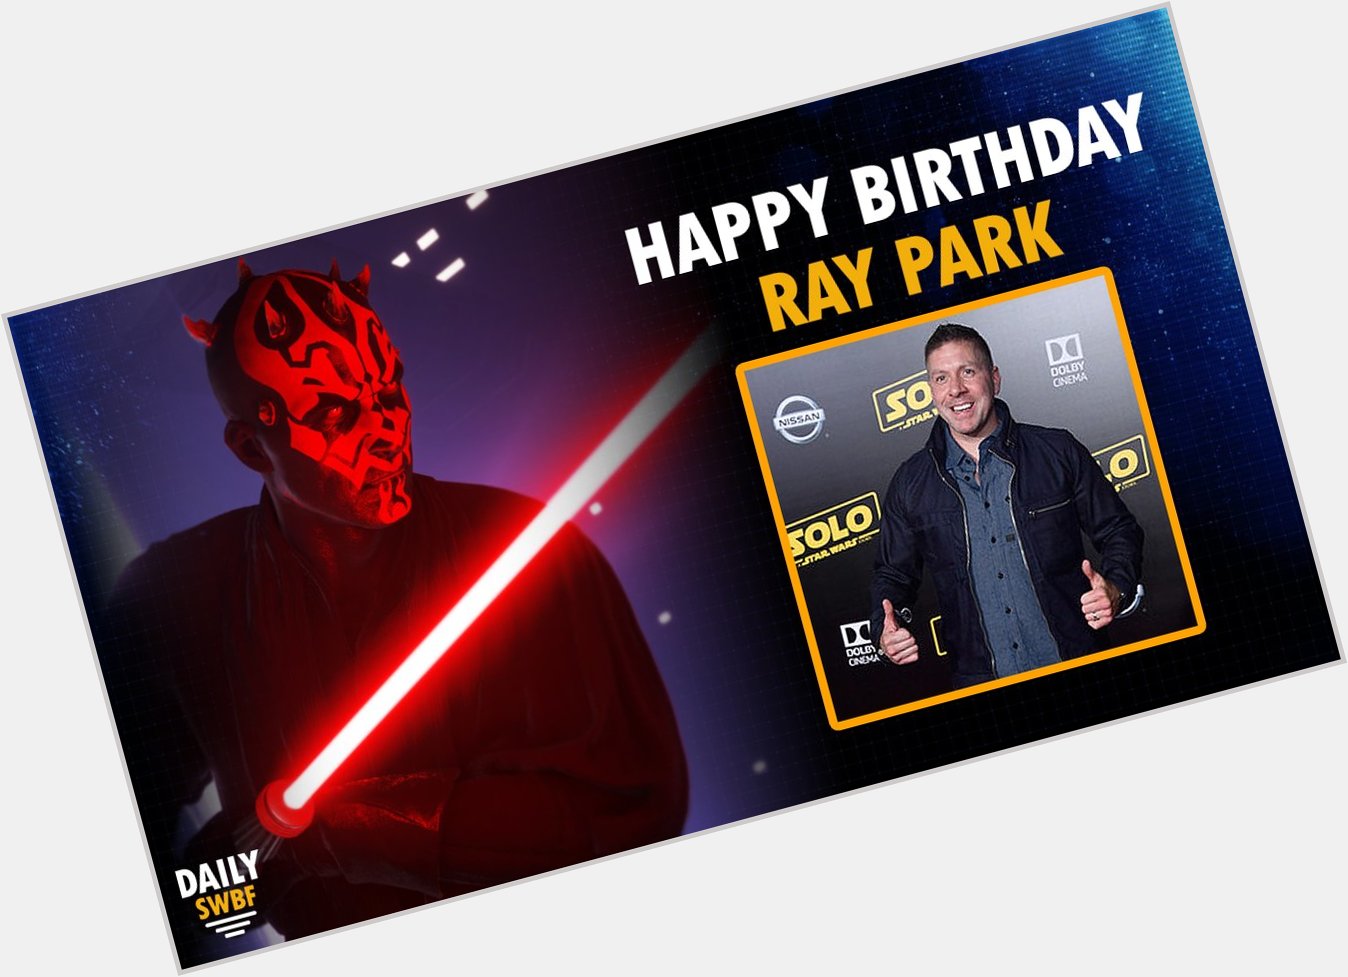 Happy birthday to the son of Dathomir, Ray Park! 